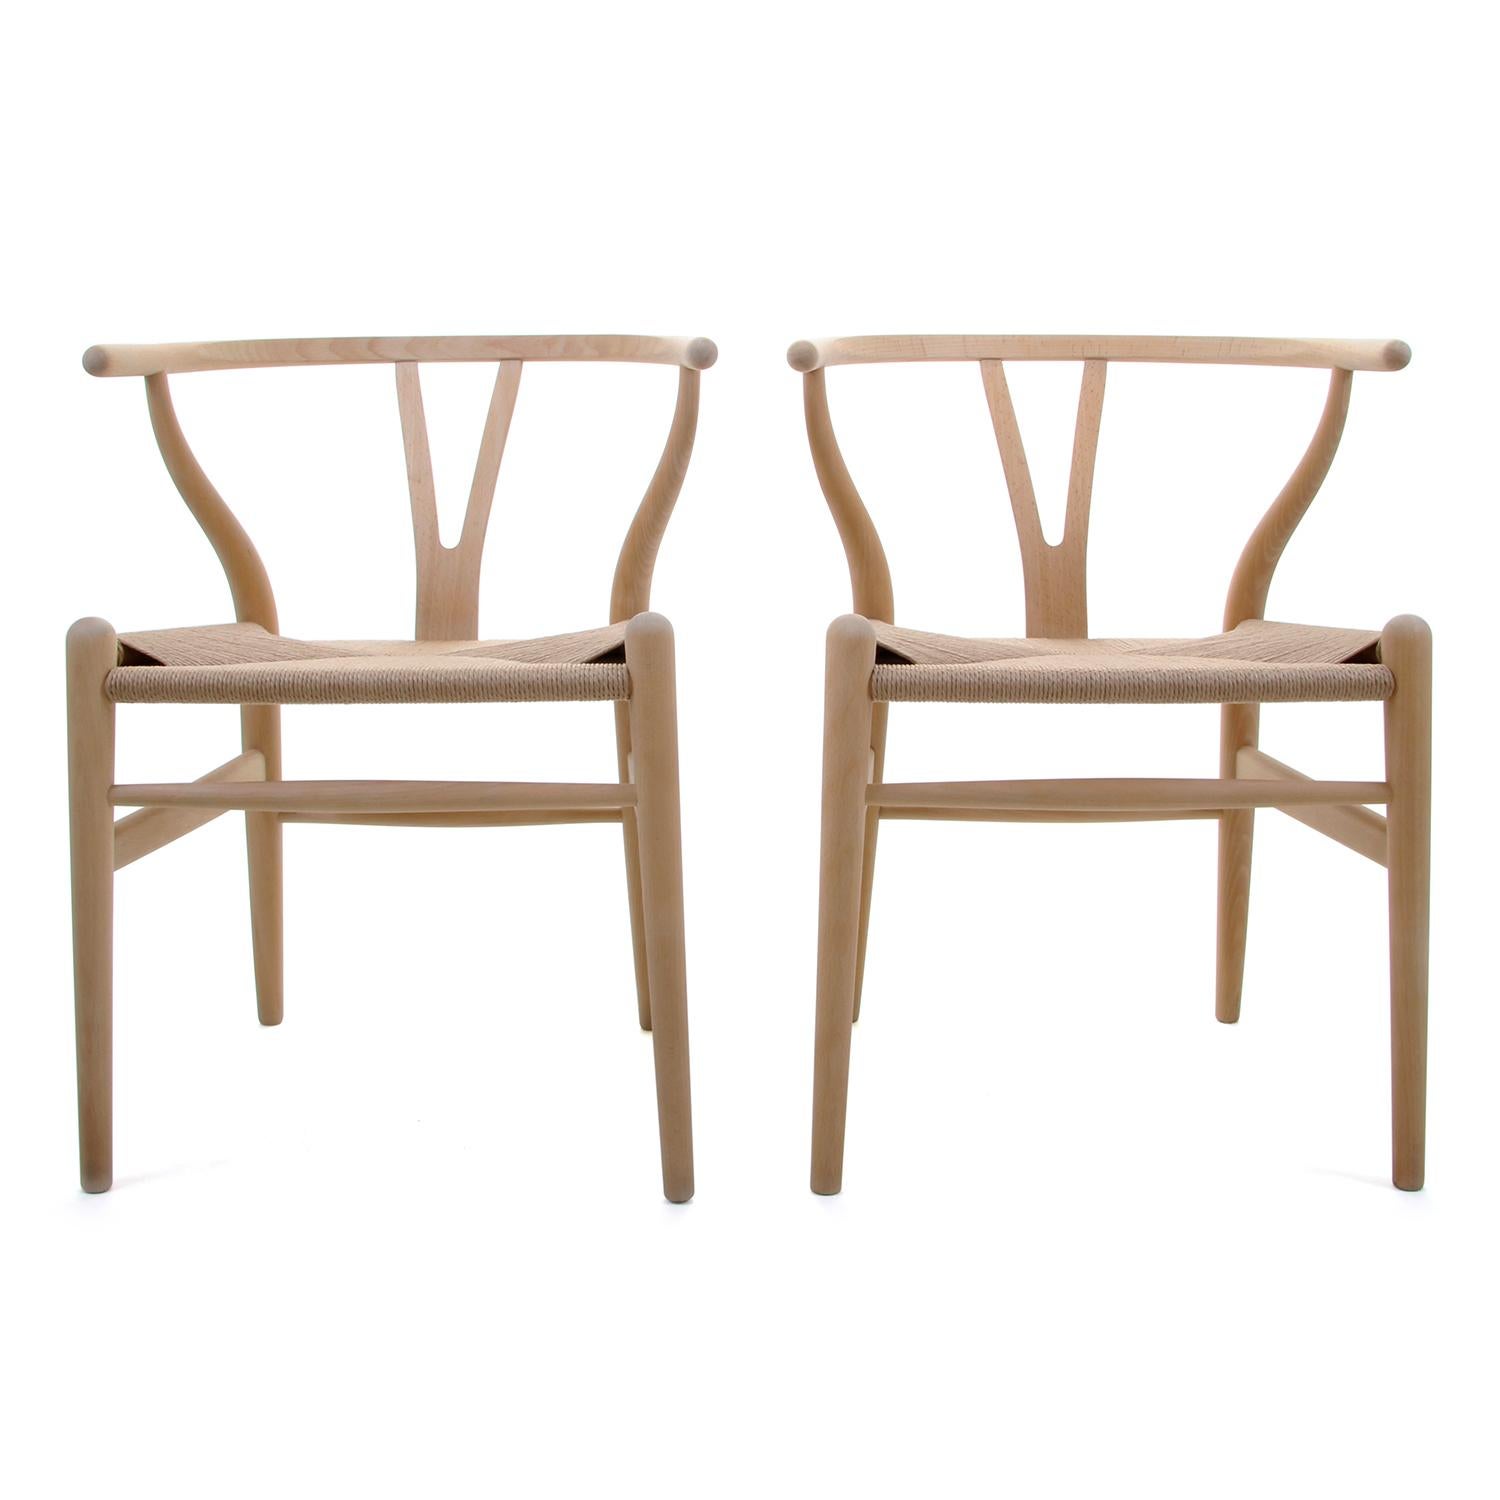 CH24 Wishbone Chairs 'Pair' by Wegner for Carl Hansen & Son in 1949, New Seat